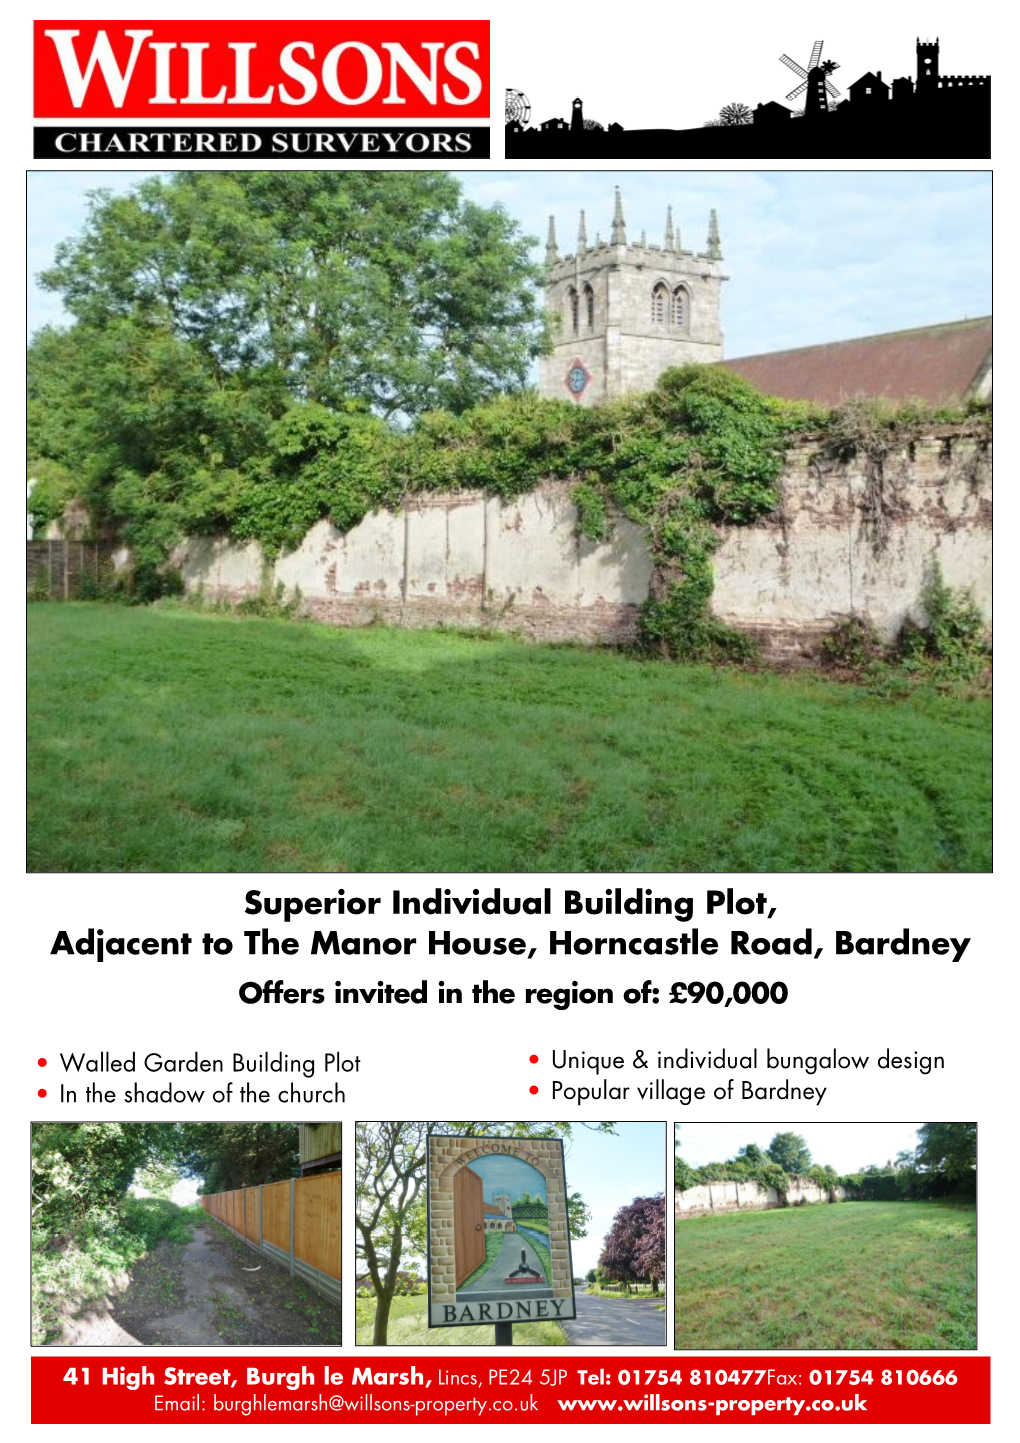 Superior Individual Building Plot, Adjacent to the Manor House, Horncastle Road, Bardney